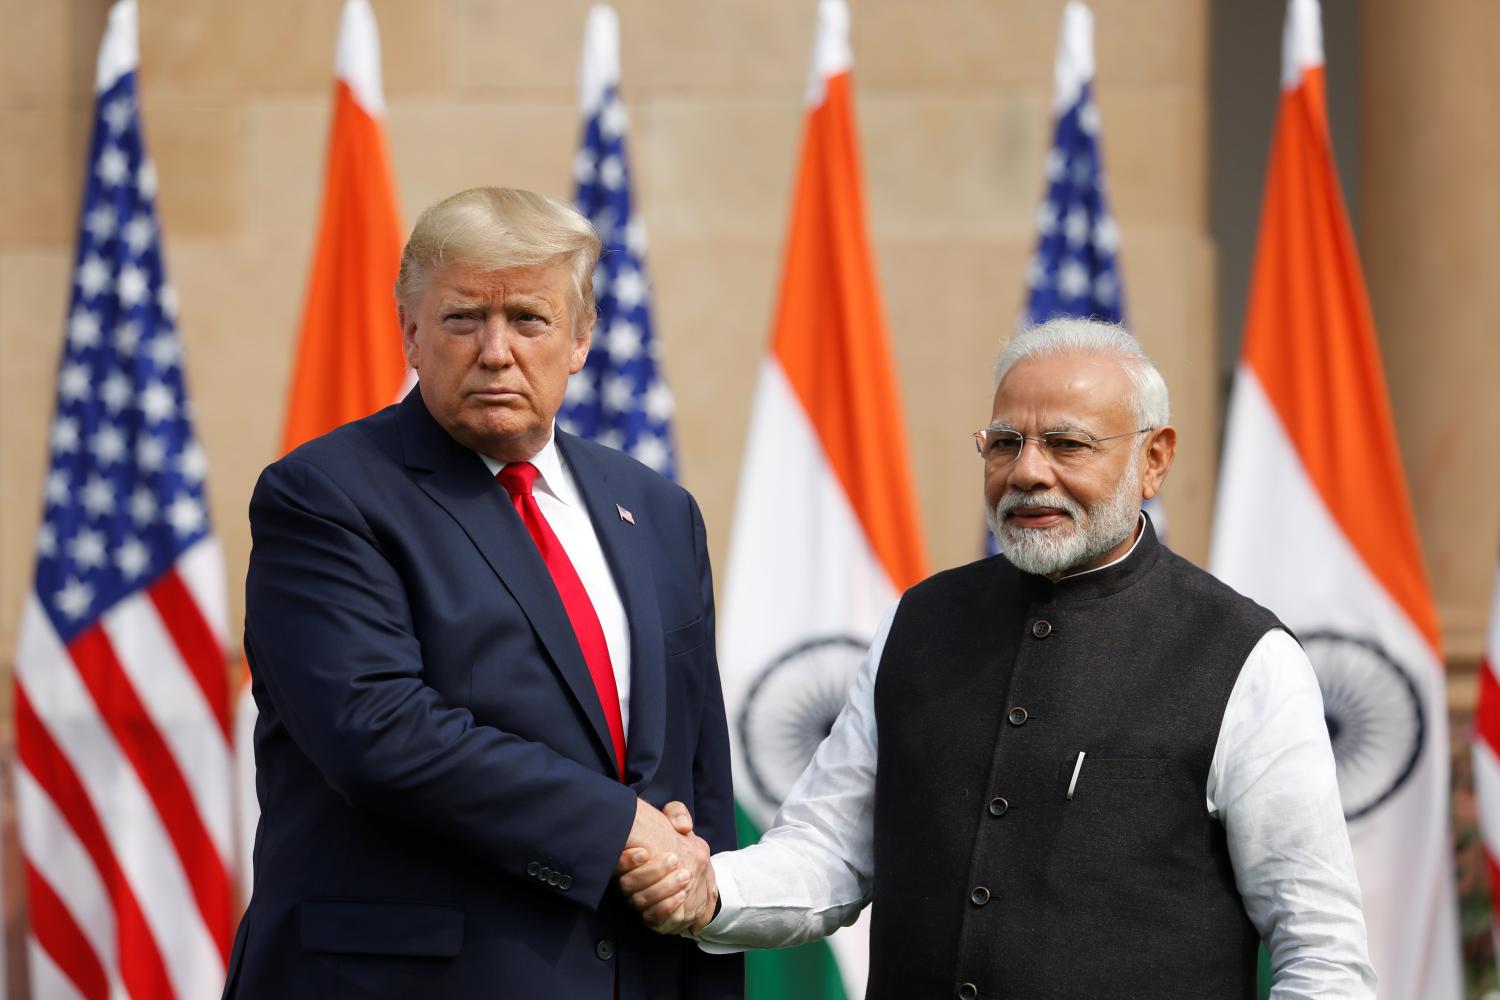 U.S. President Donald Trump shakes hands with Indian Prime Minister Narendra Modi at Hyderabad House in New Delhi, India, February 25, 2020. REUTERS/Al Drago - RC2H7F9USHX9